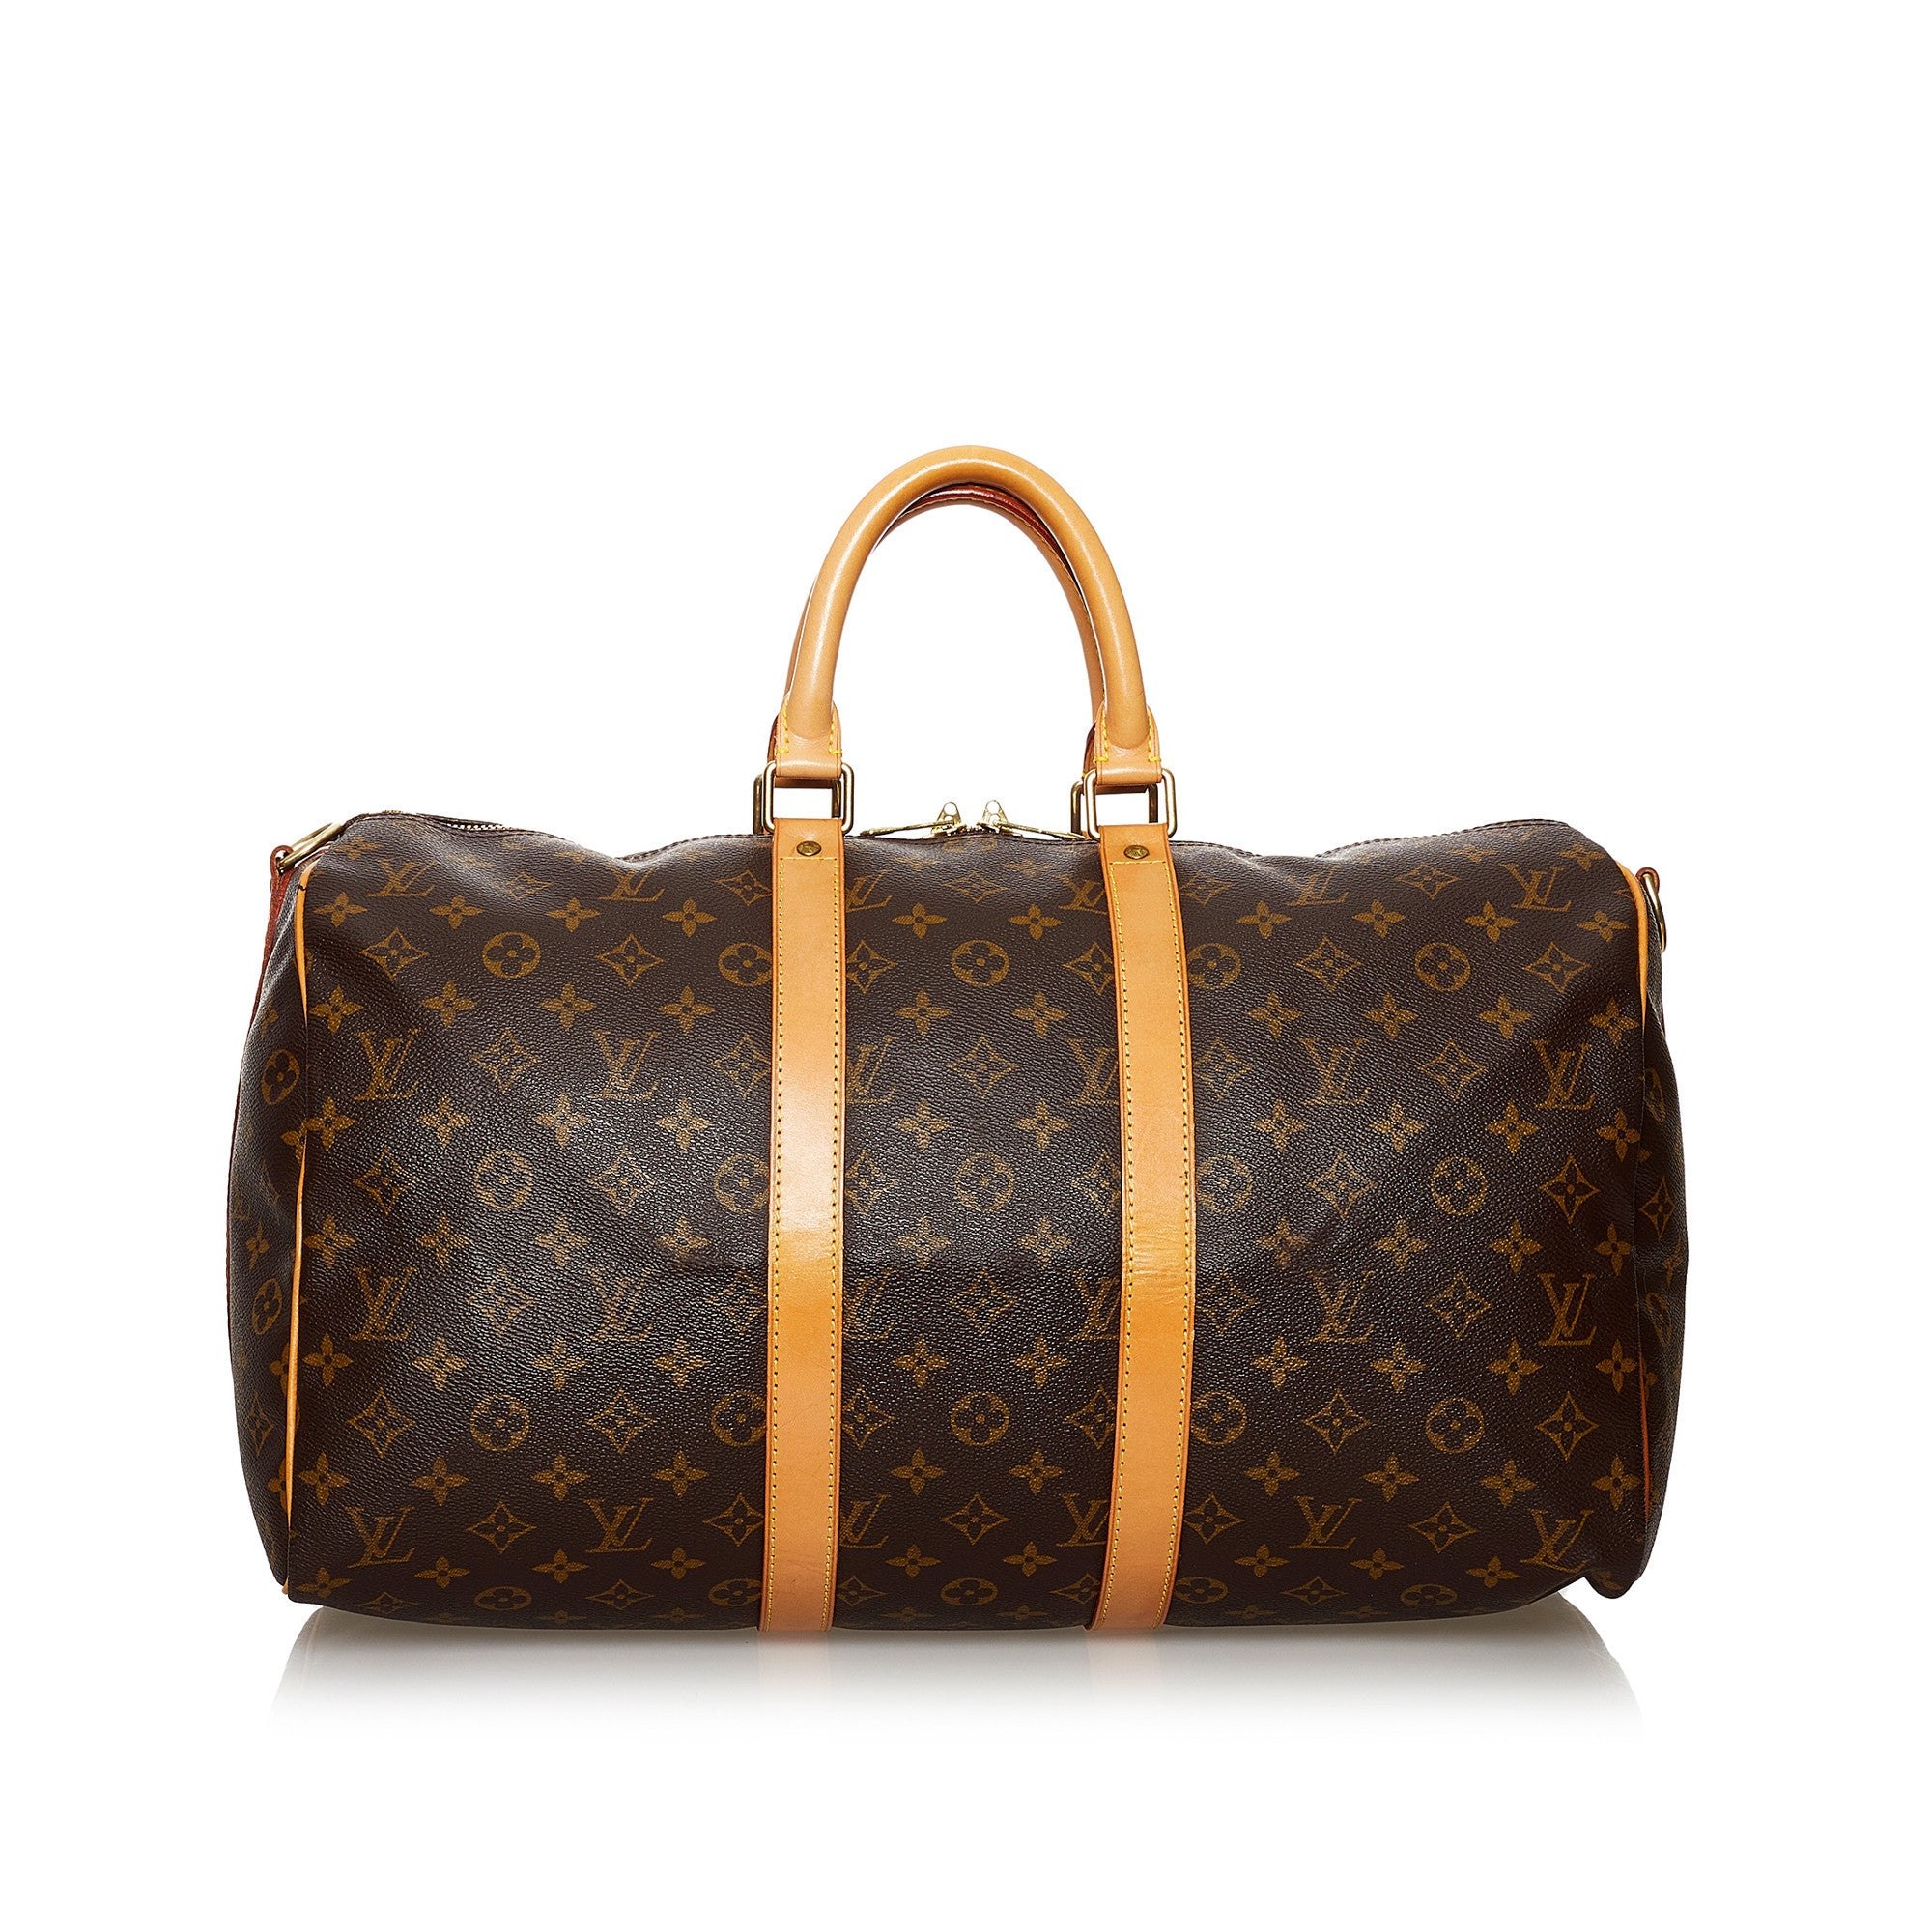 Louis Vuitton - Keepall, Authentic Used Bags & Handbags